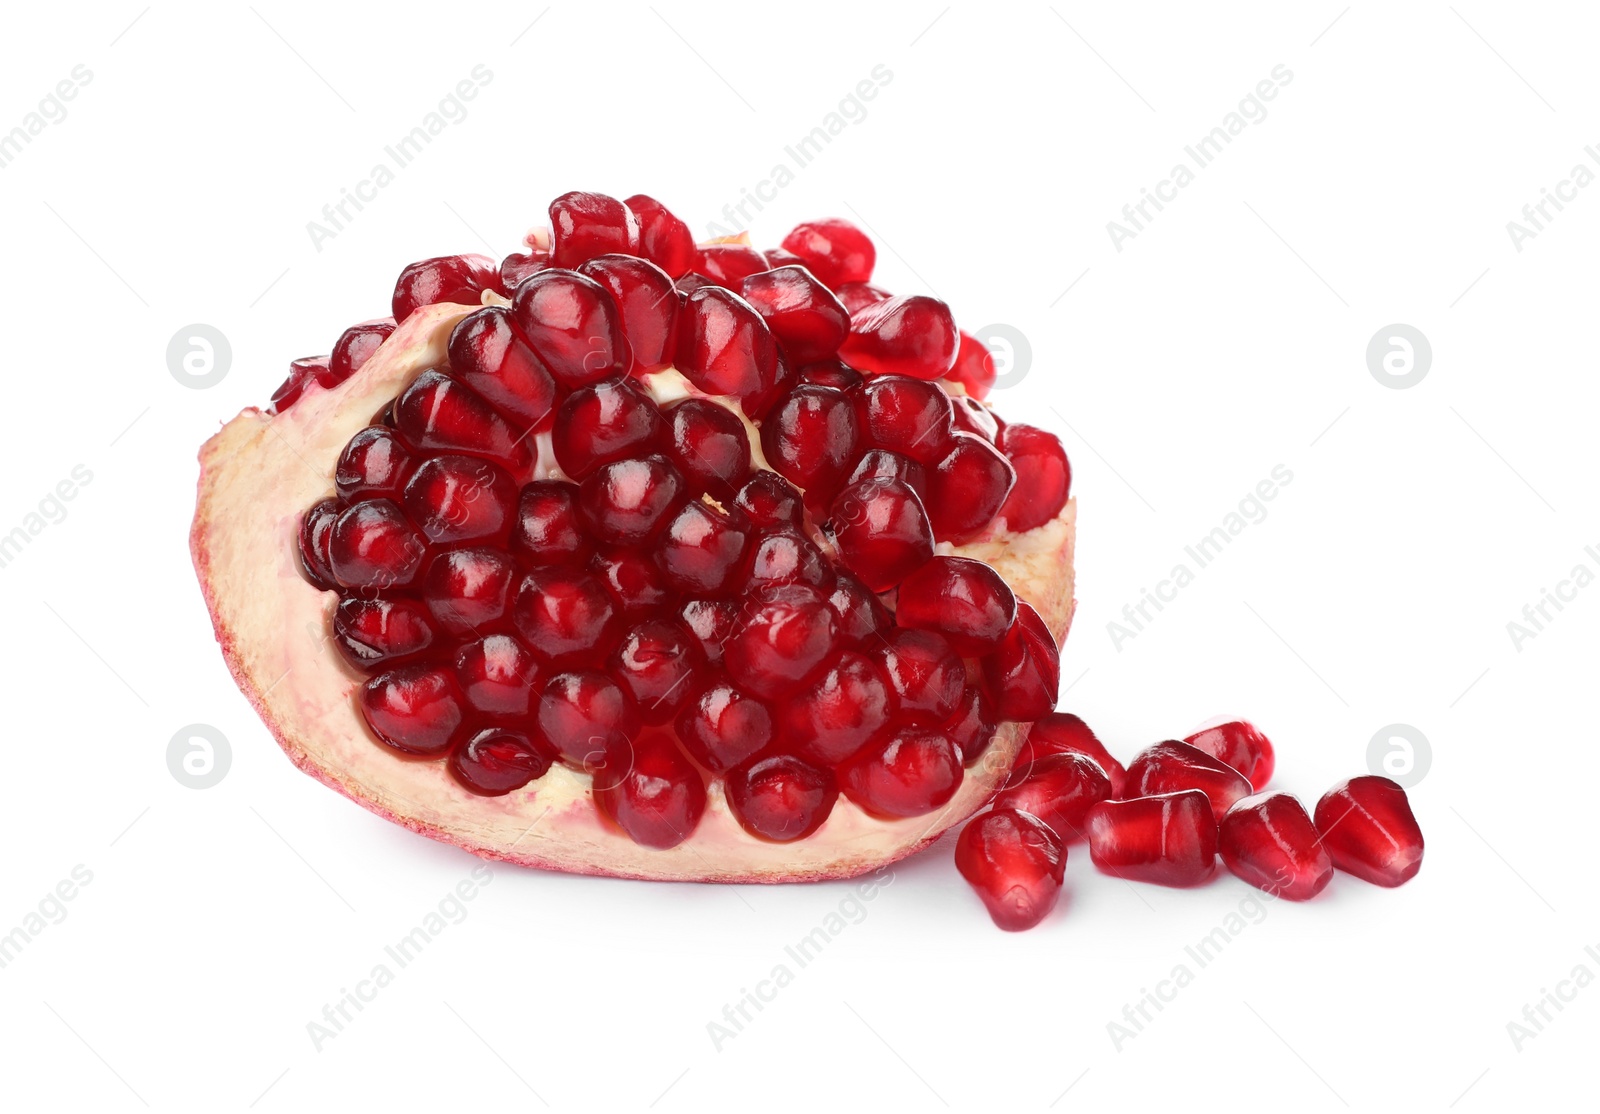 Photo of Piece of ripe juicy pomegranate on white background